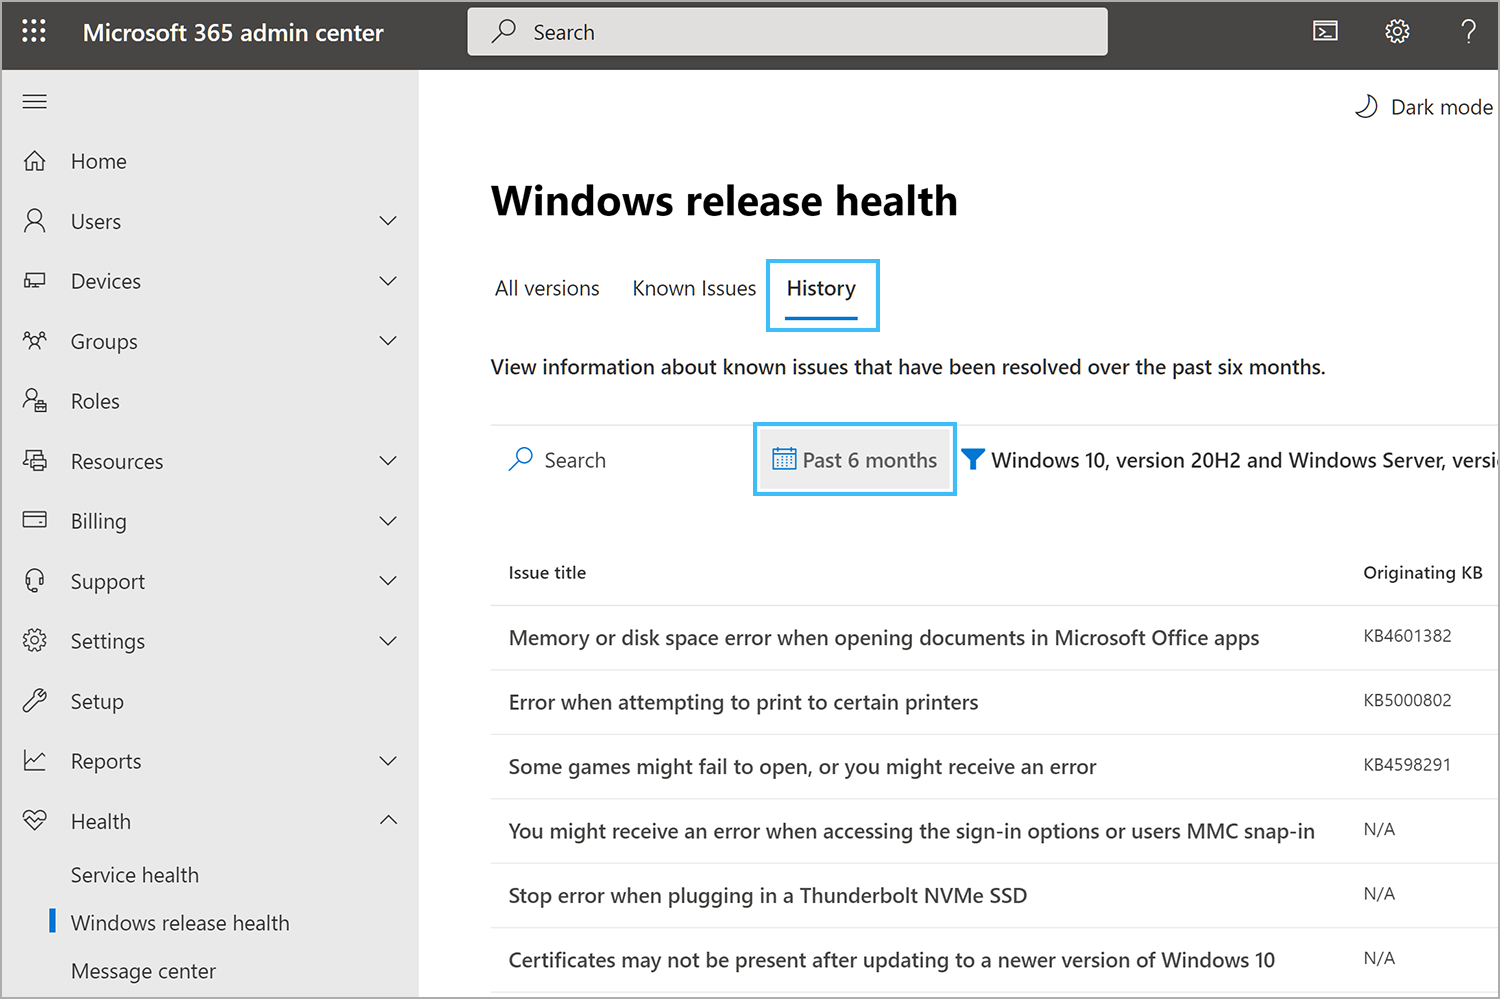 View of history issues in release health.